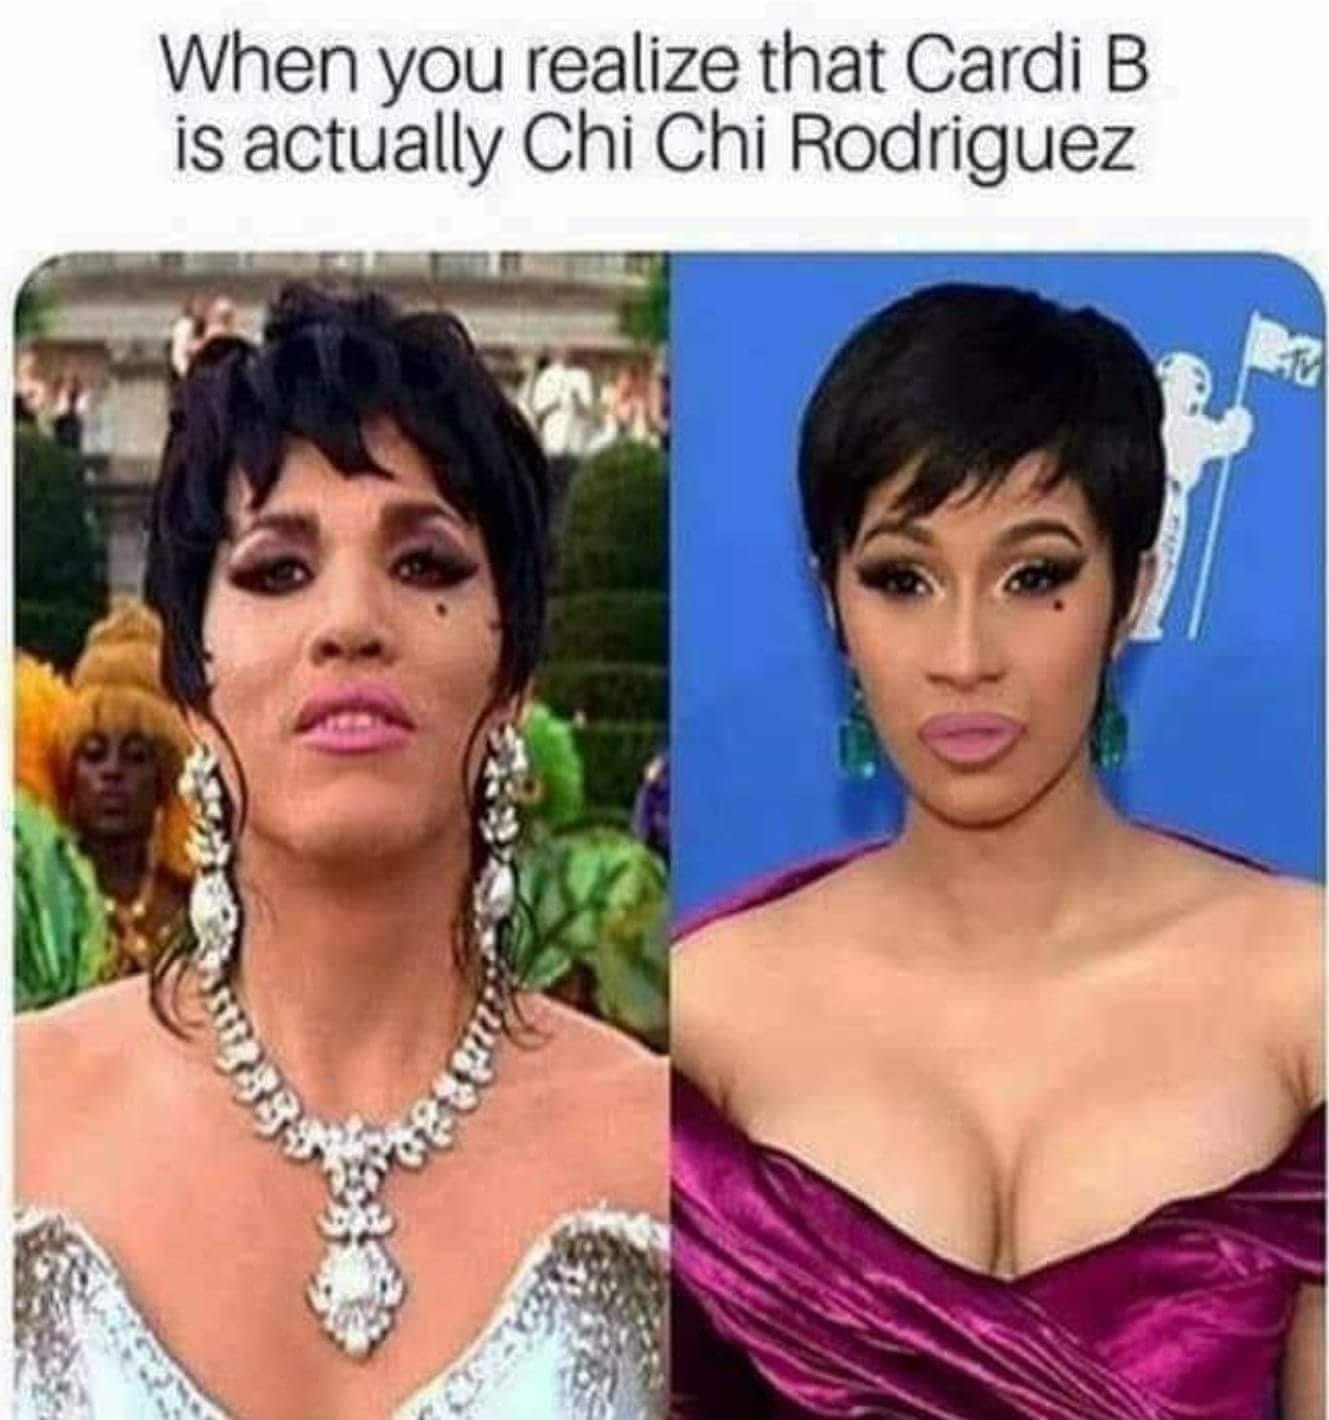 random pic cardi b august 20 - When you realize that Cardi B is actually Chi Chi Rodriguez